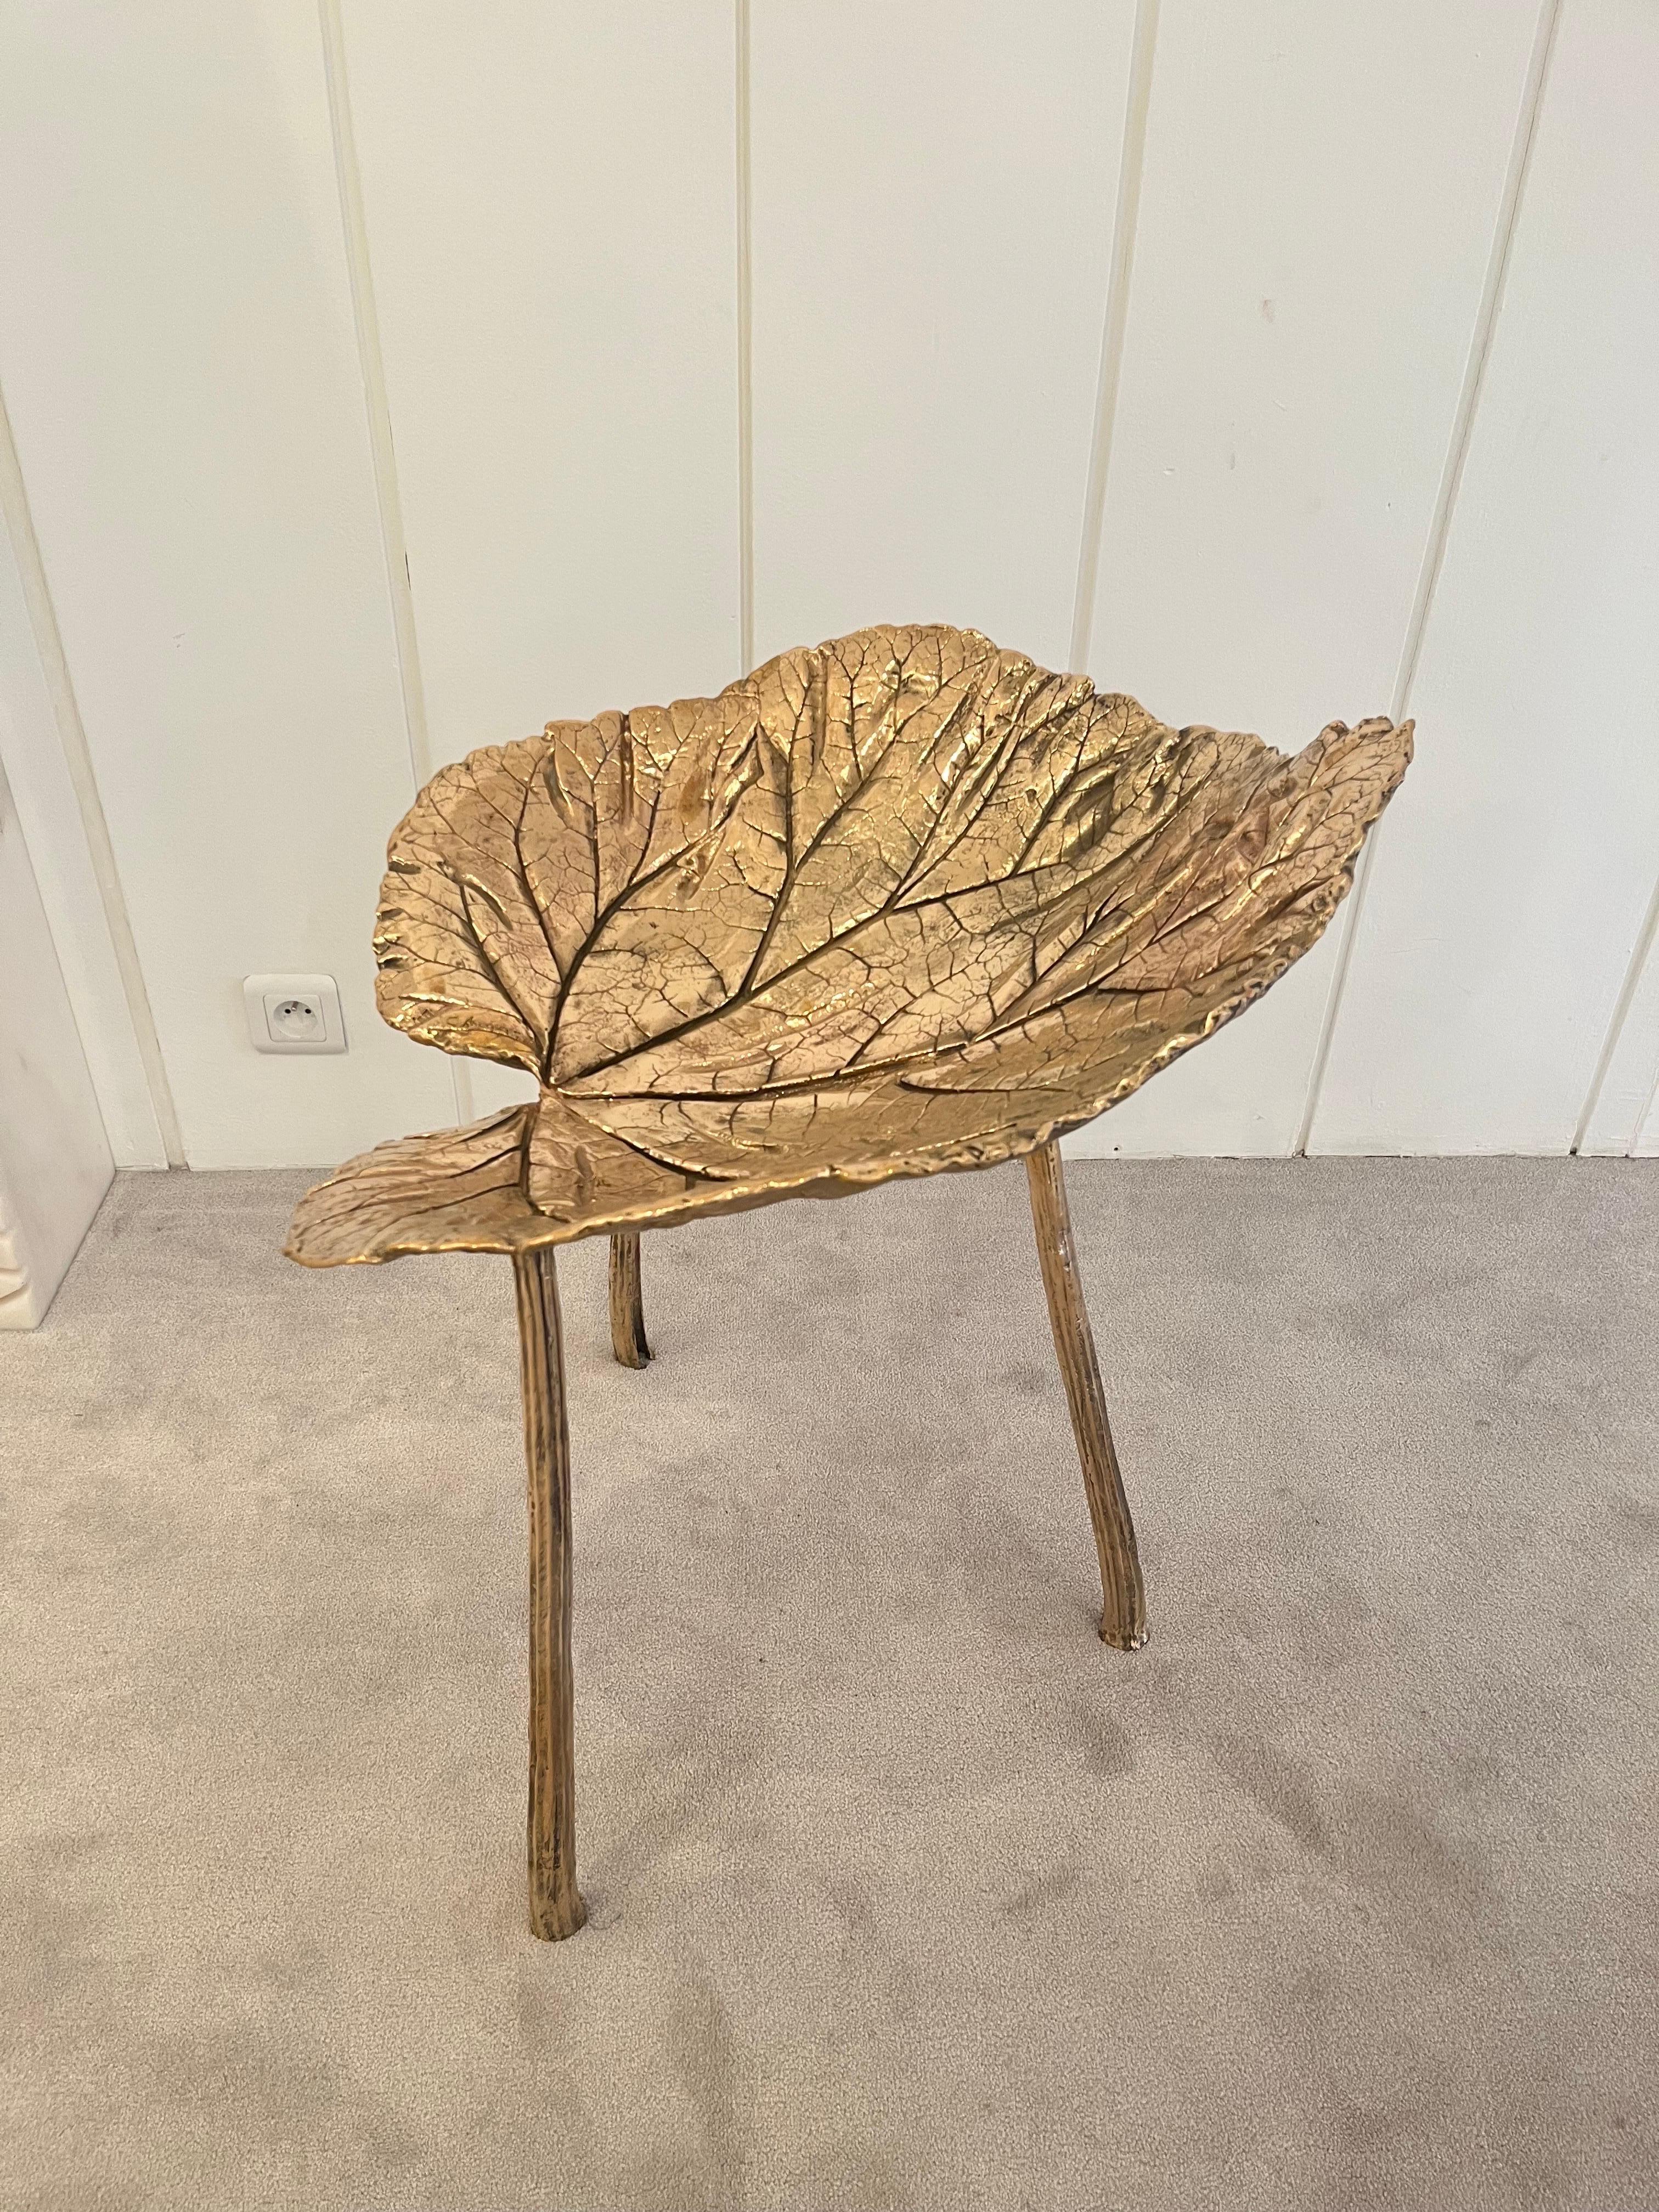 Contemporary Bronze Large Stool by Clotilde Ancarani For Sale